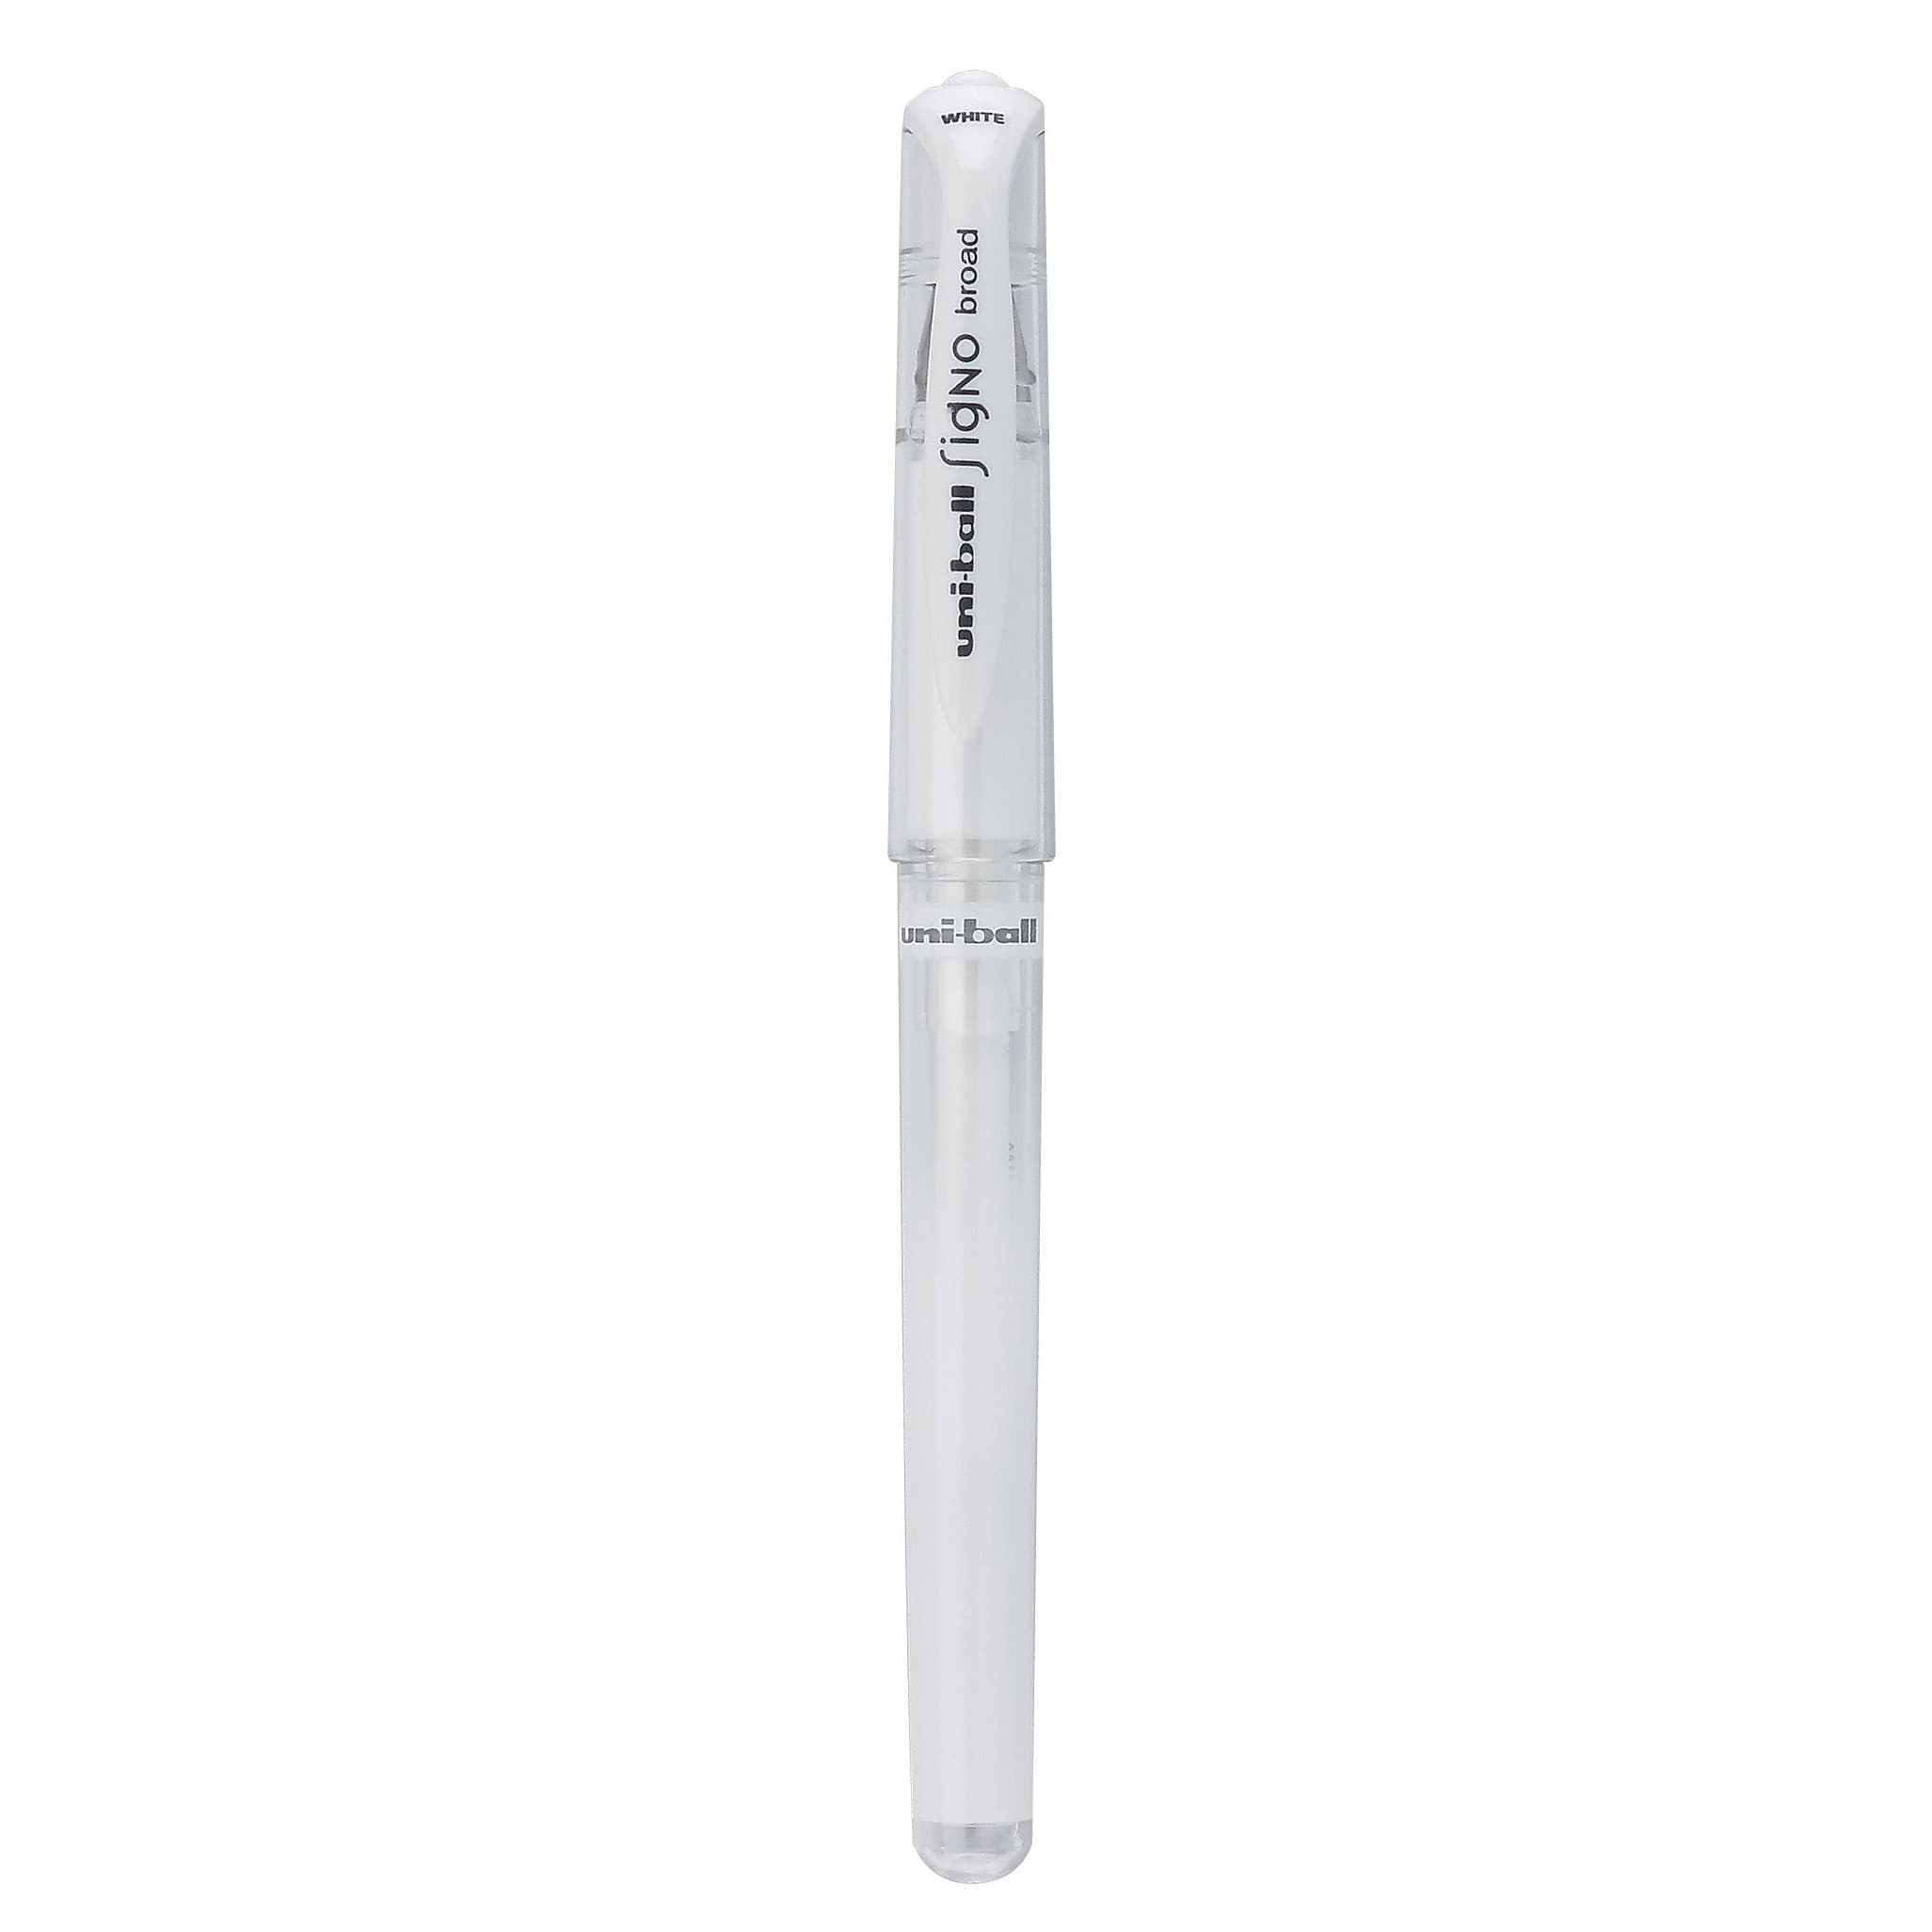 Signo Uniball white gel pen for marker holder [SUPHS] - $4.50 : Chomas  Creations, Moving in the write direction!